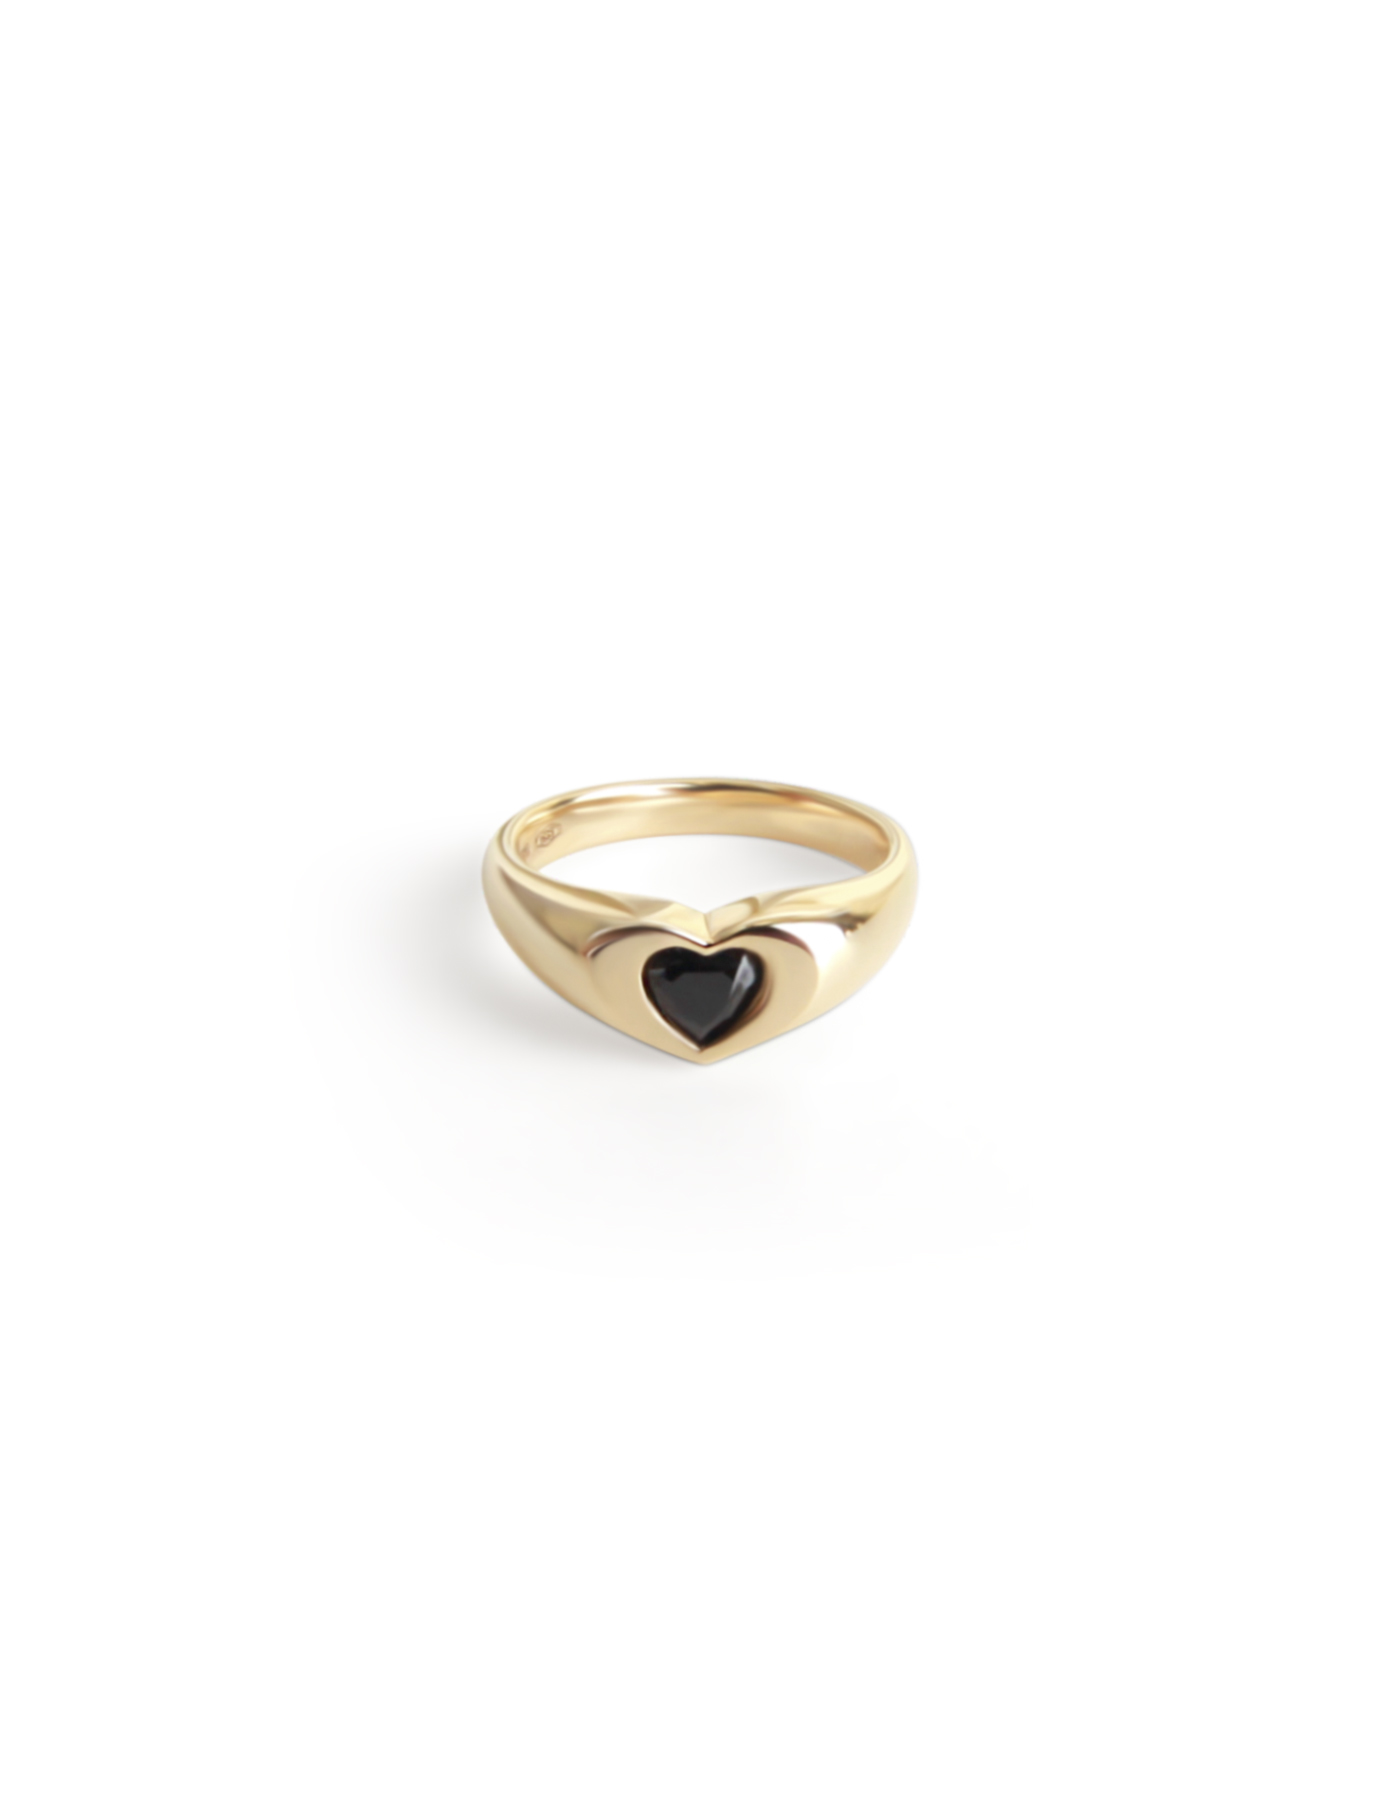 Pinky Heart Ring (Black Spinel)